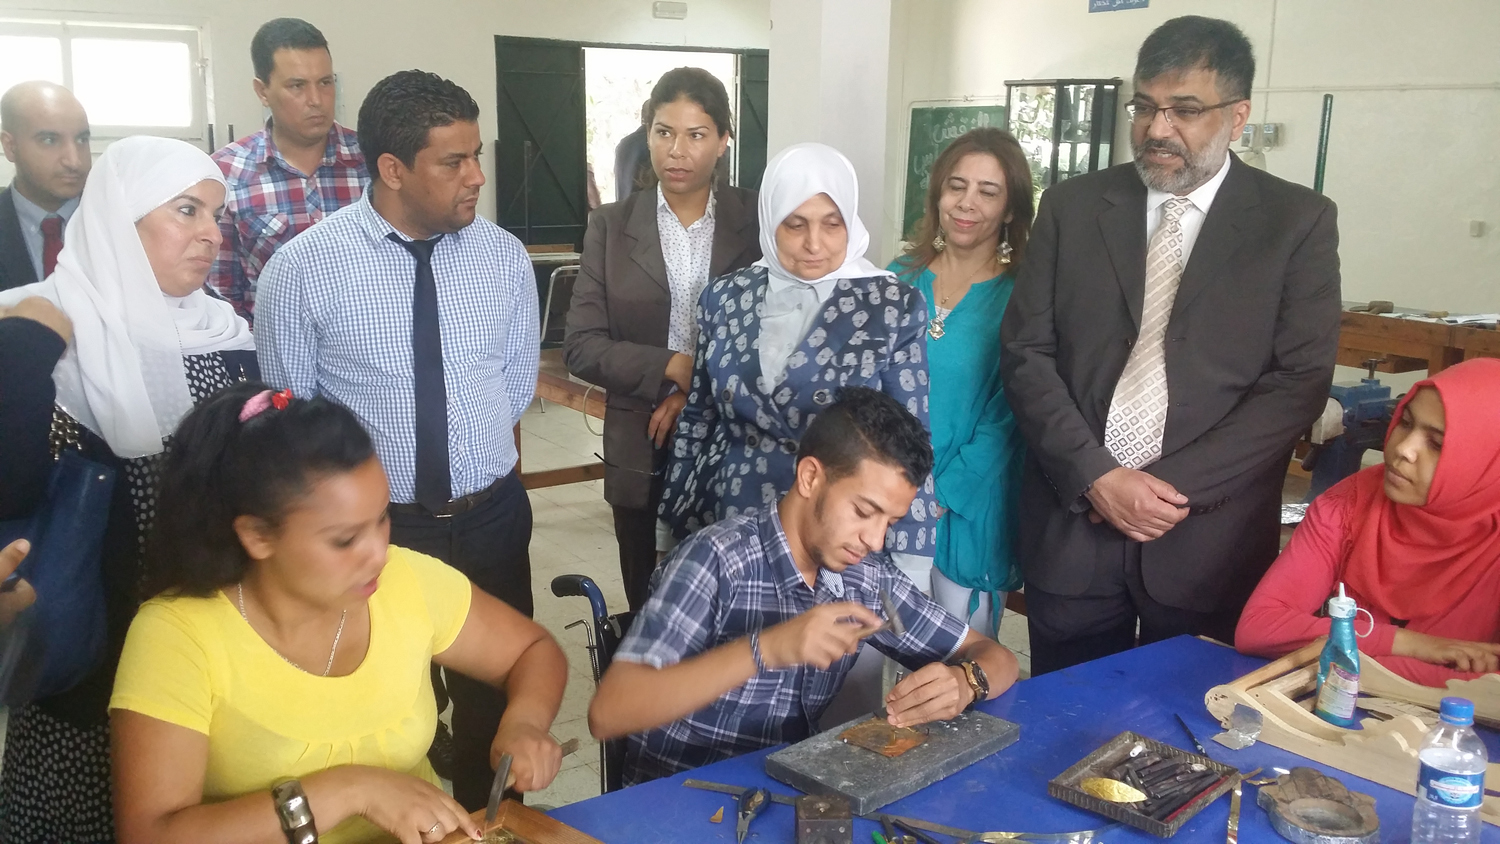 Minister of Social Affairs and Labor and Minister of State for Planning and Development Affairs Hend Al-Sabeeh tours centers for the disabled in Tunisia